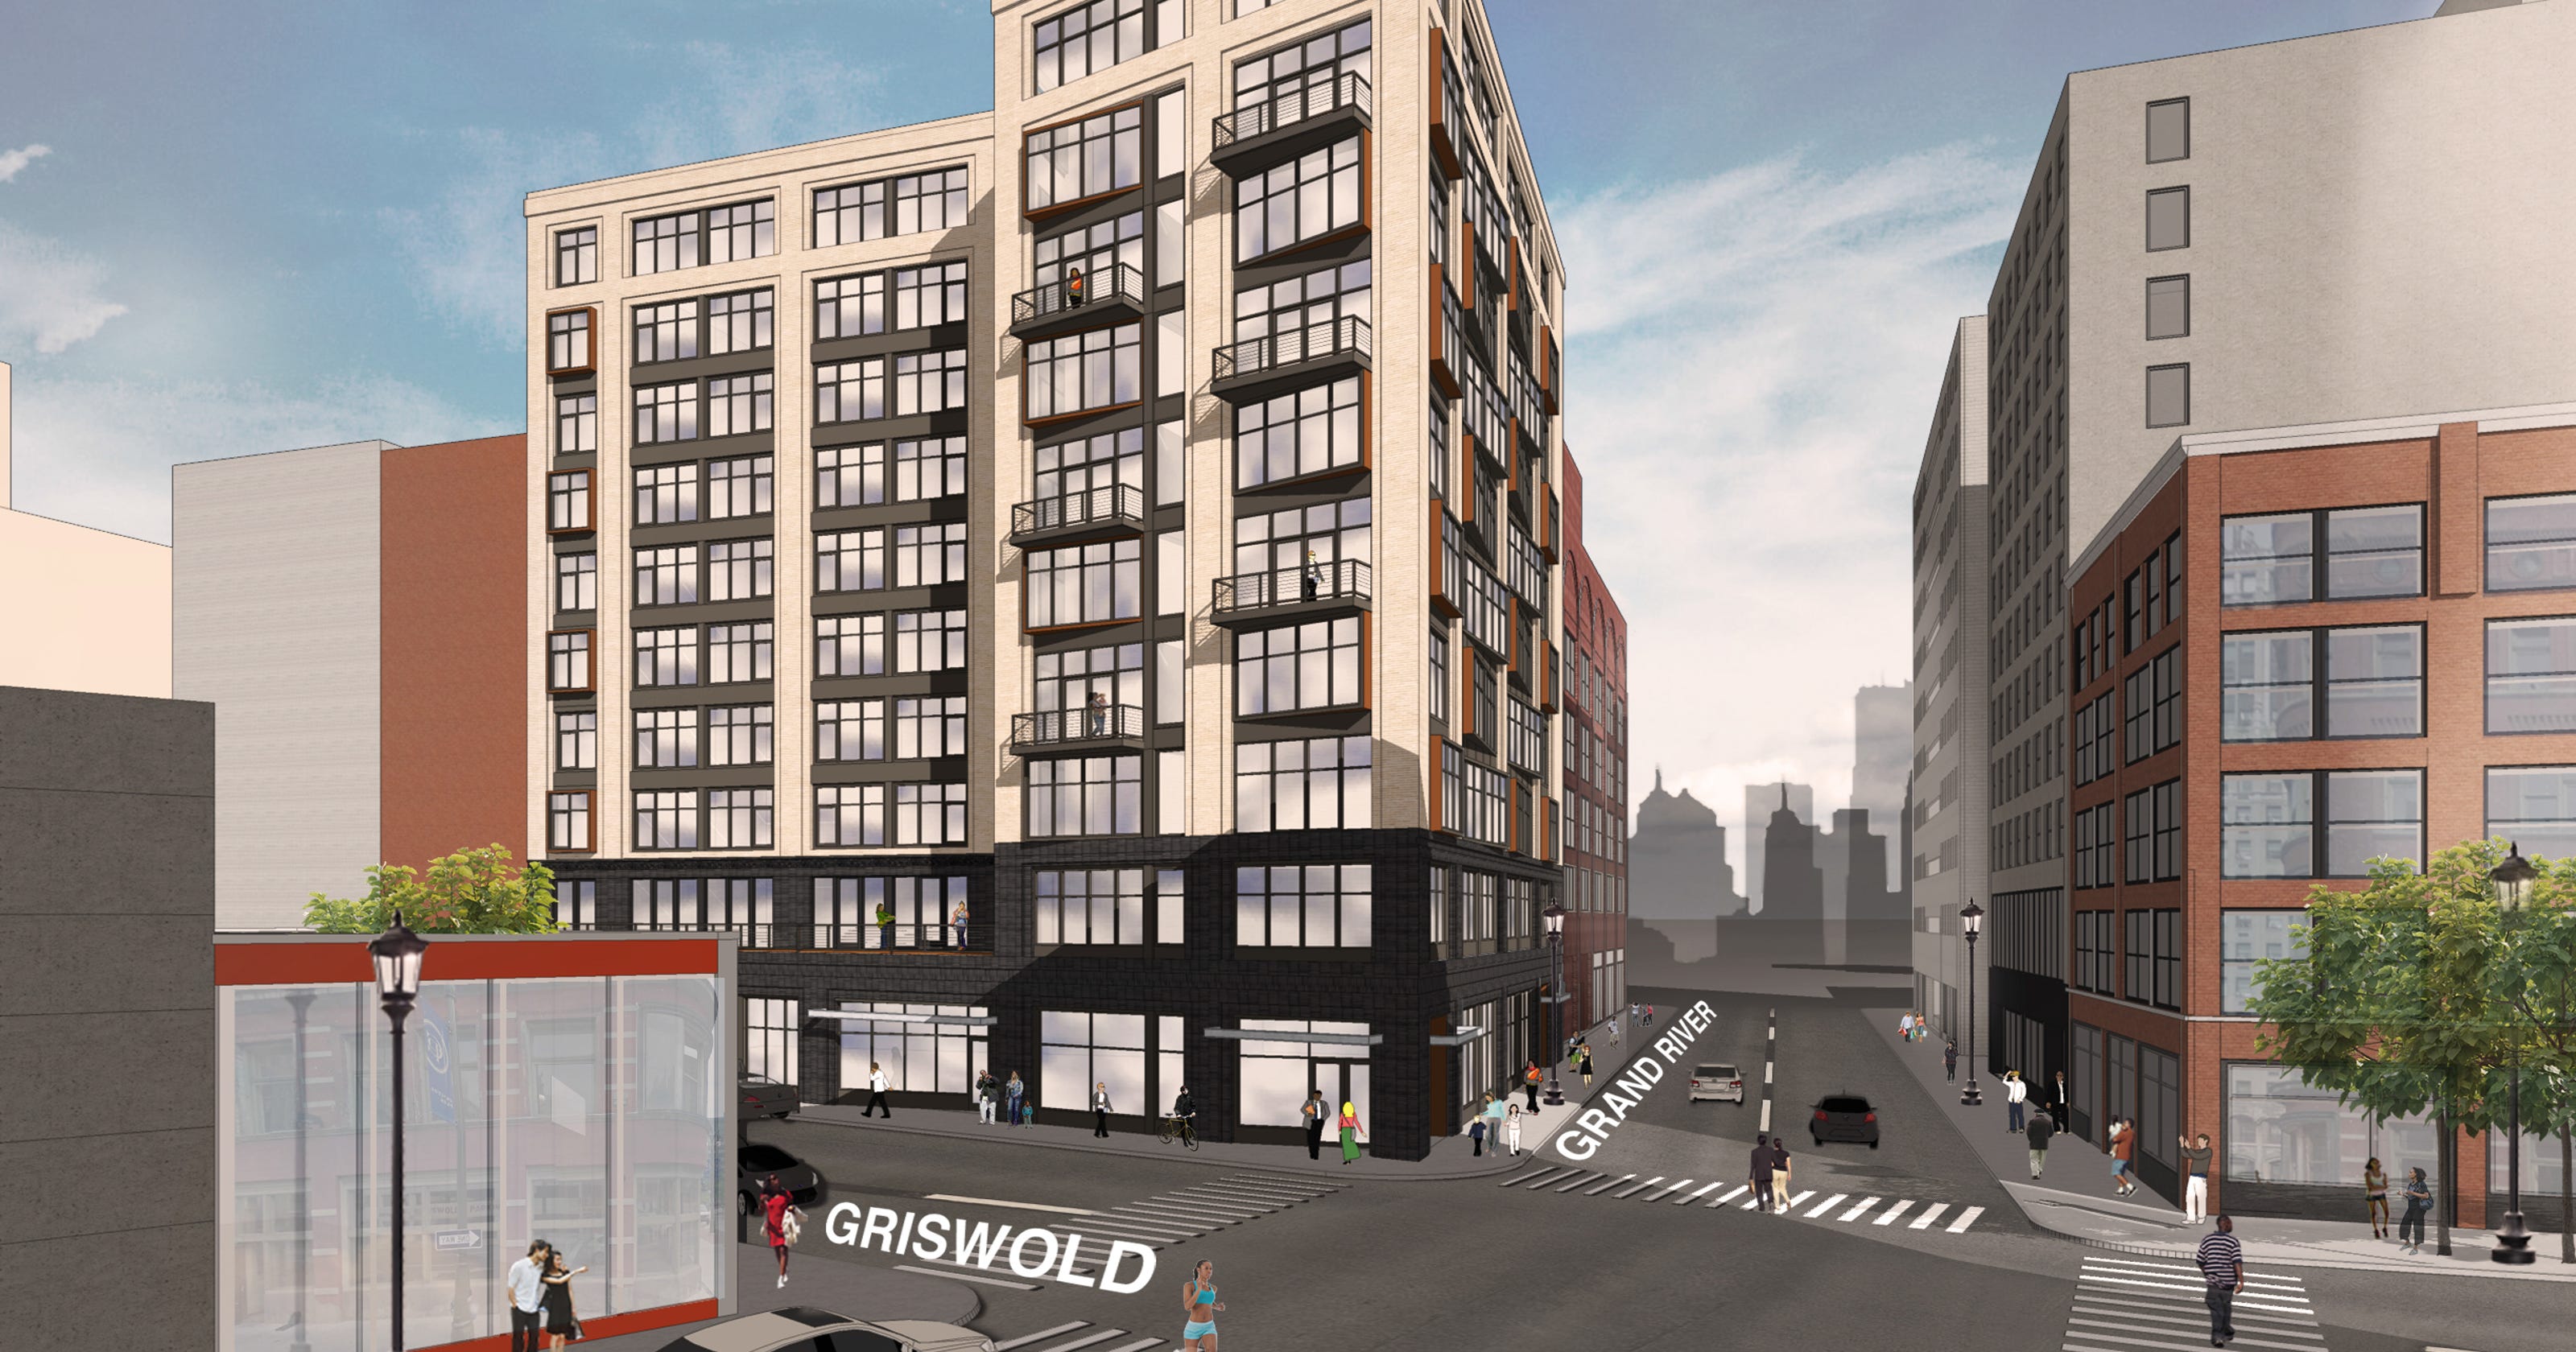 Gilbert plans 10-story apartment building downtown